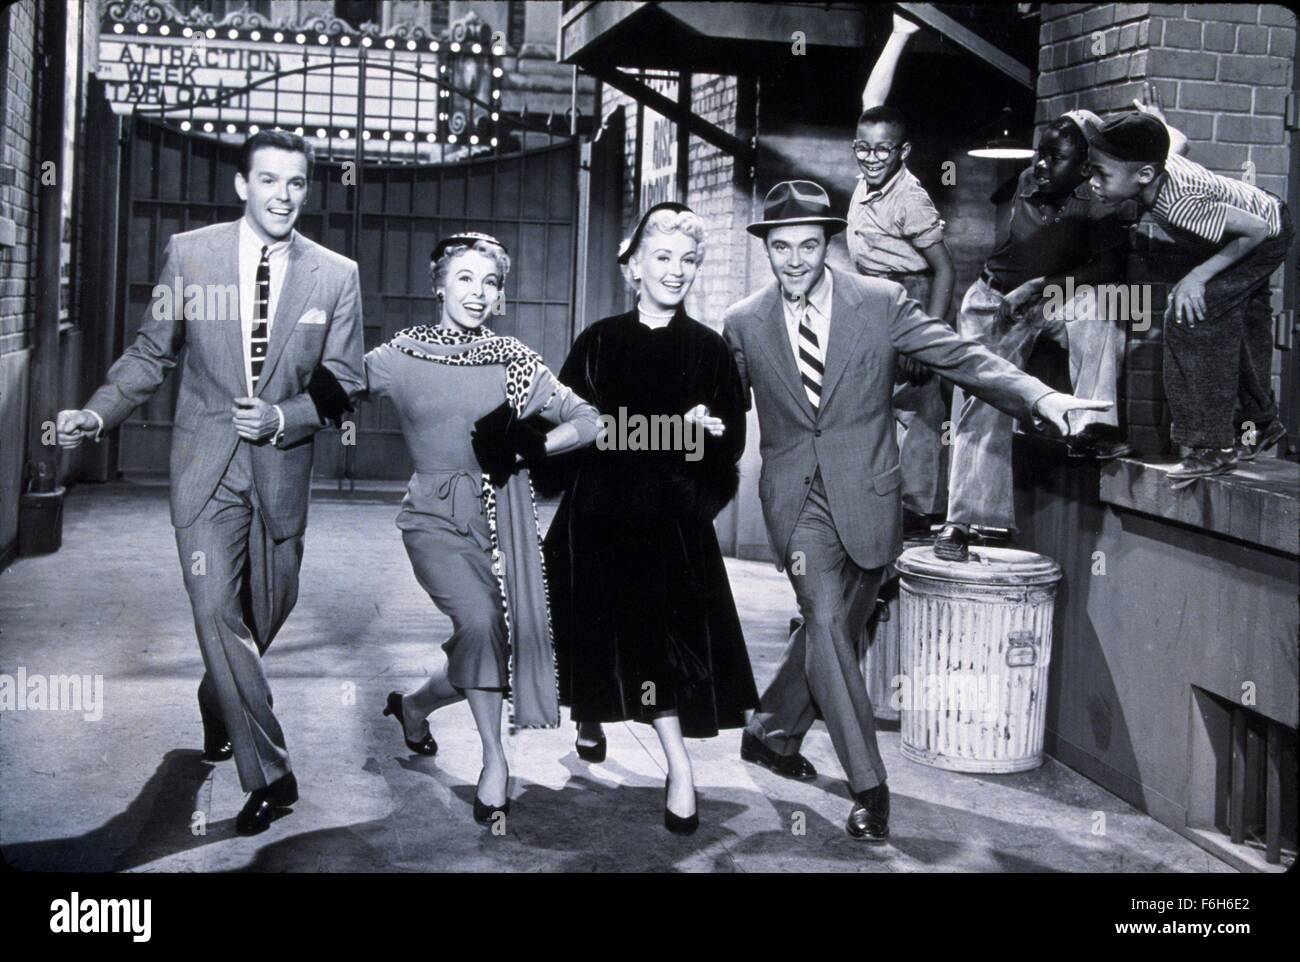 1955, Film Title: THREE FOR THE SHOW, Director: H C POTTER, Studio: COLUMBIA, Pictured: GOWER CHAMPION, MARGE CHAMPION, DANCING, BETTY GRABLE, JACK LEMMON, ARM IN ARM, ALLEY, MUSICAL, TRASH CAN. (Credit Image: SNAP) Stock Photo